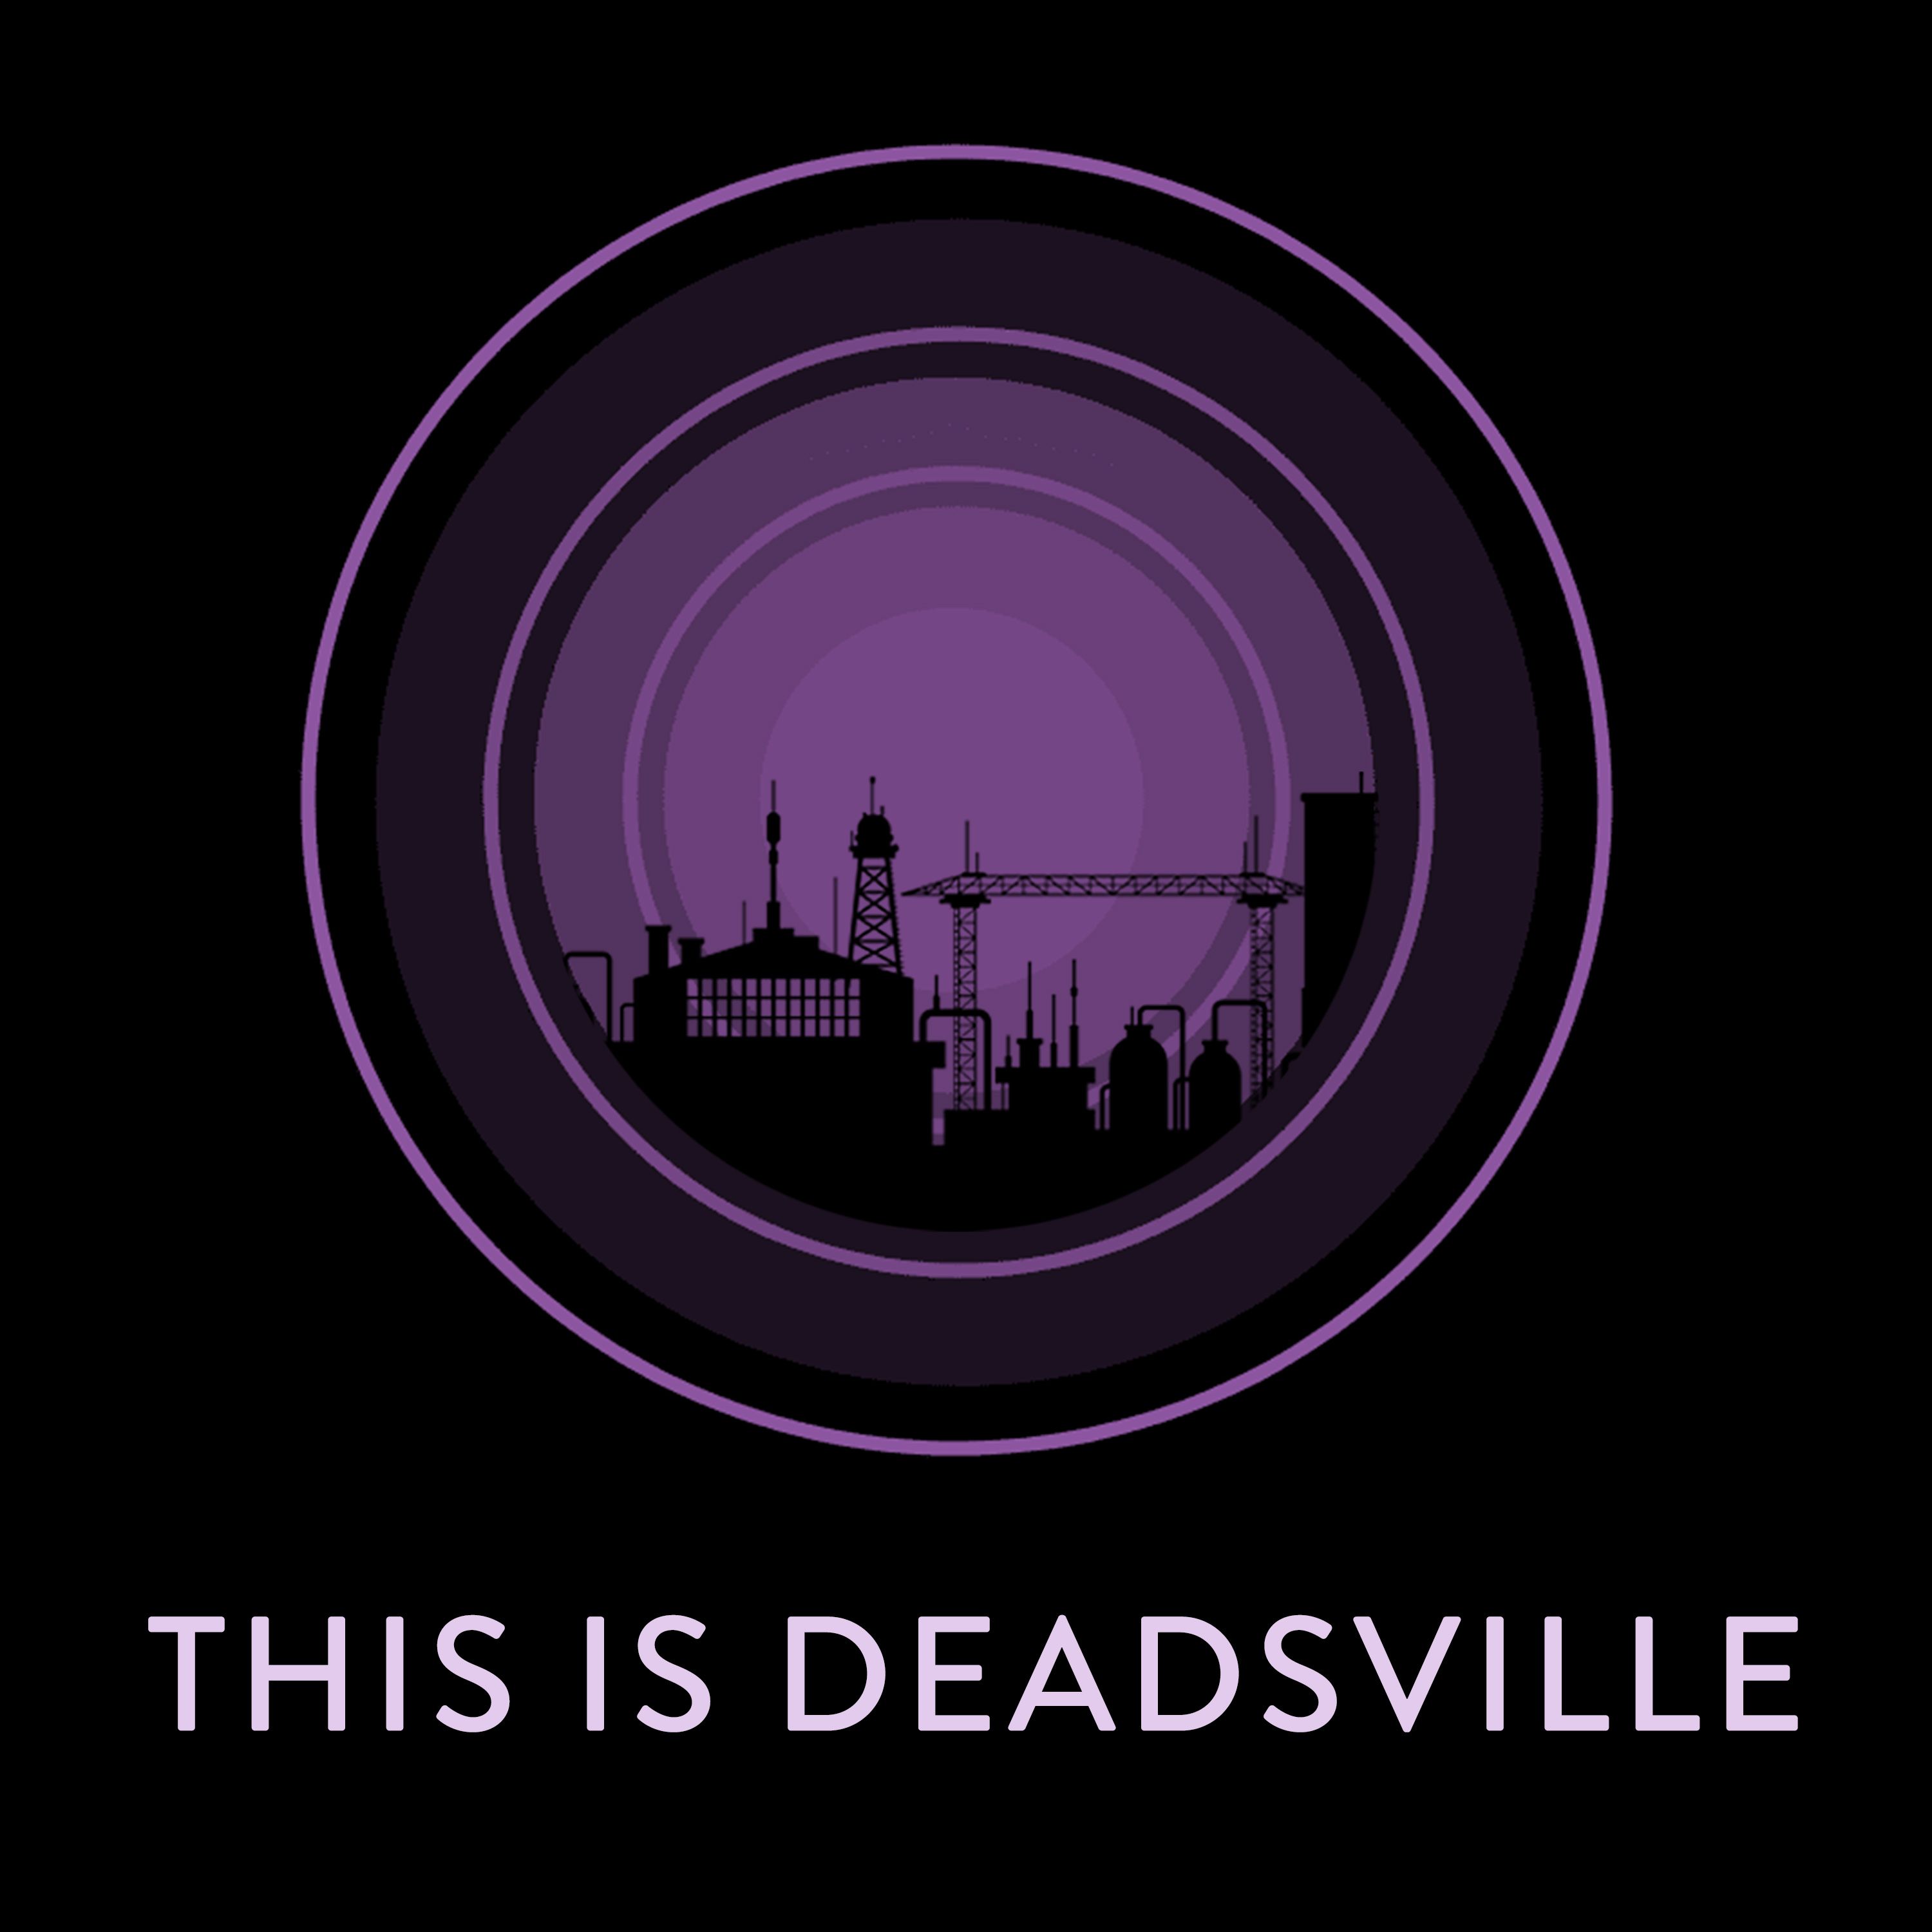 Coming Soon: This is Deadsville